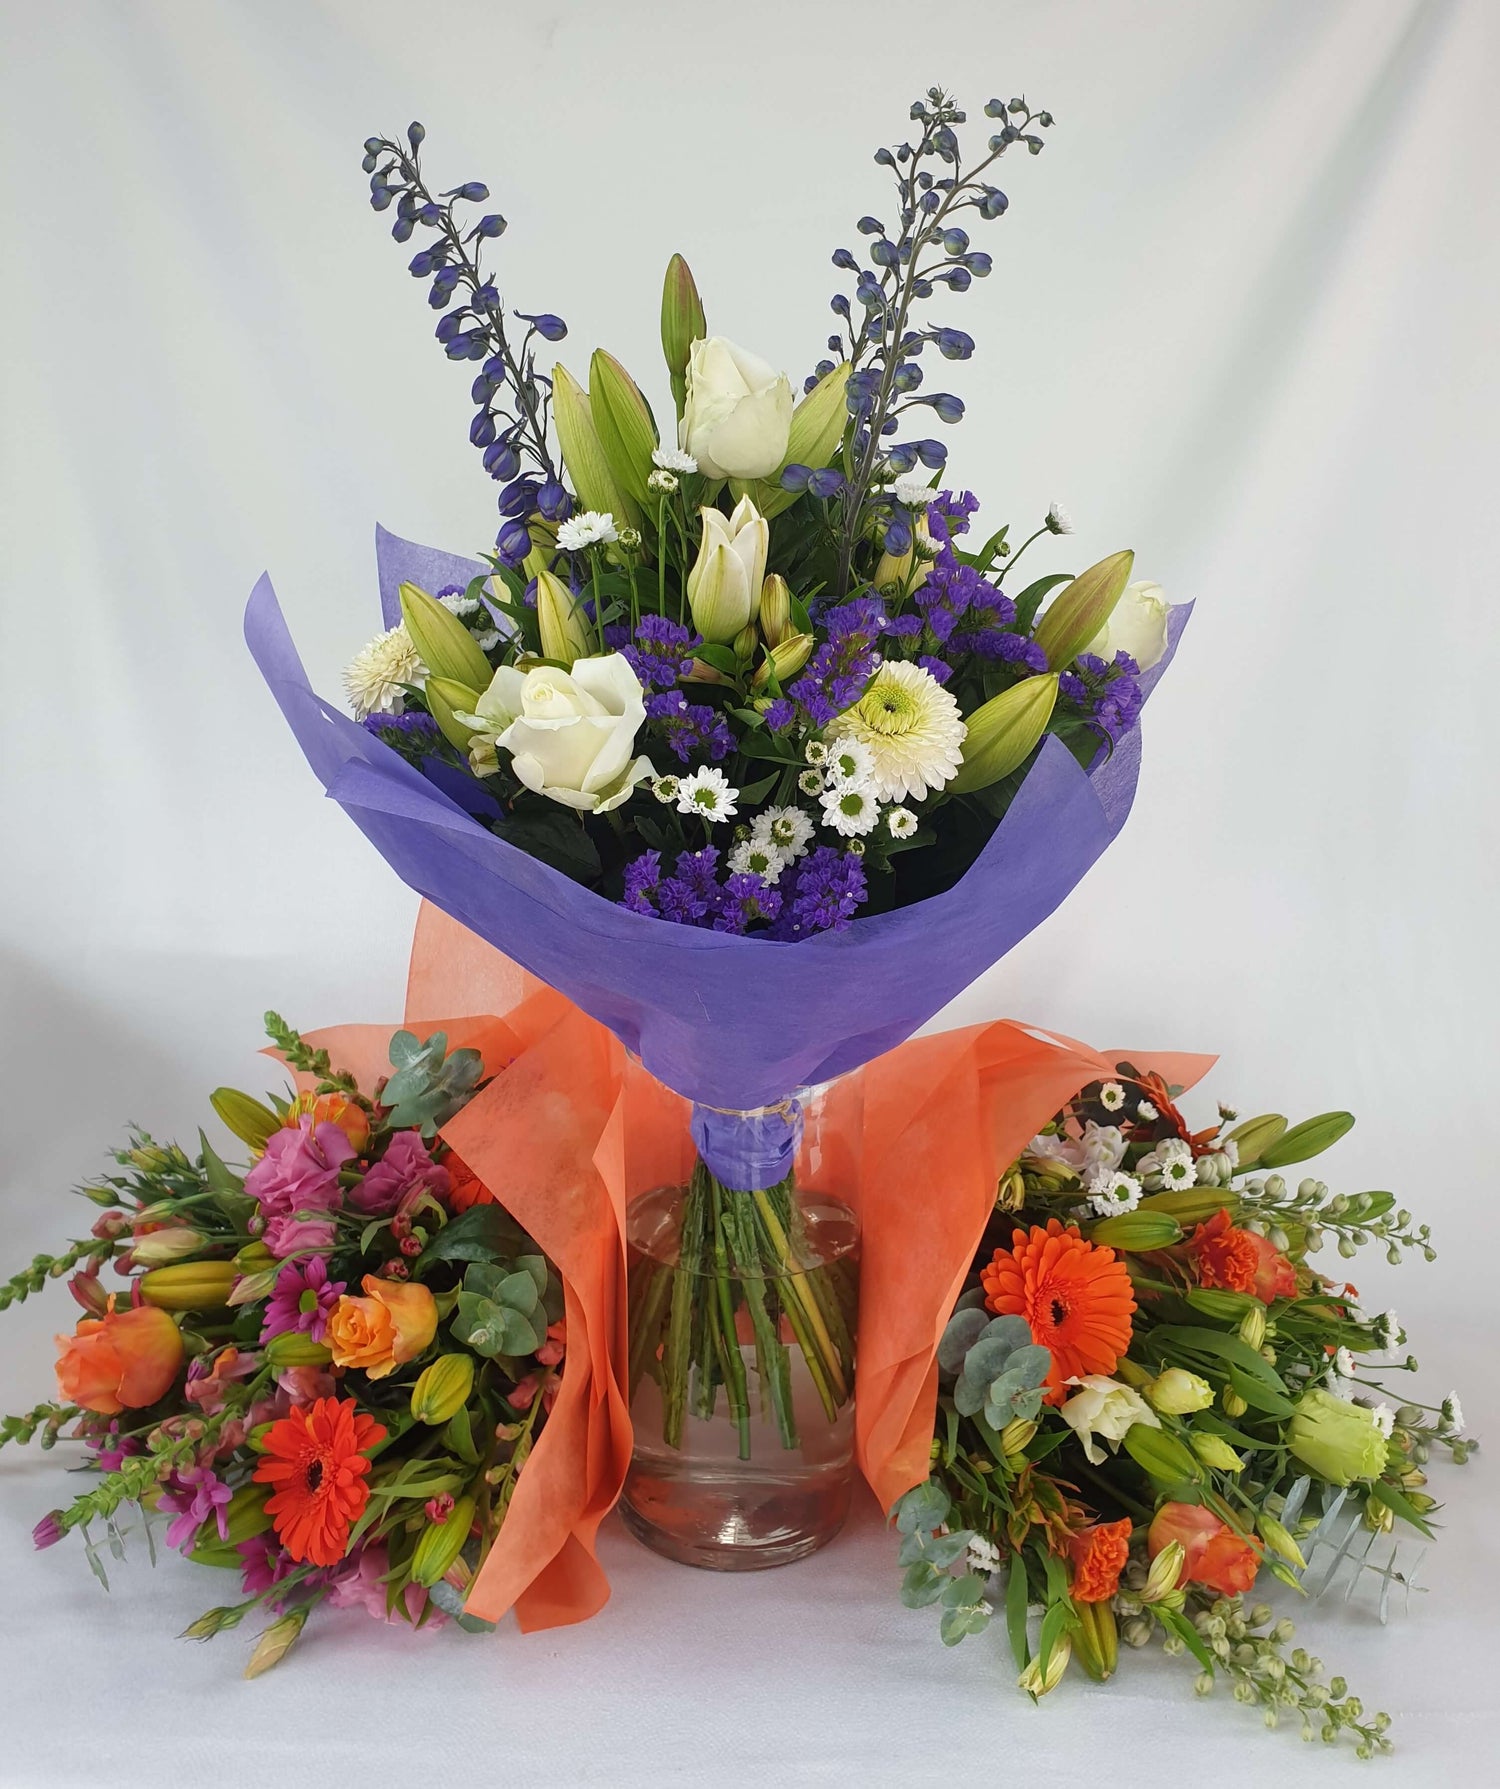 Three bouquets that are an example of what we offer in our subscription.